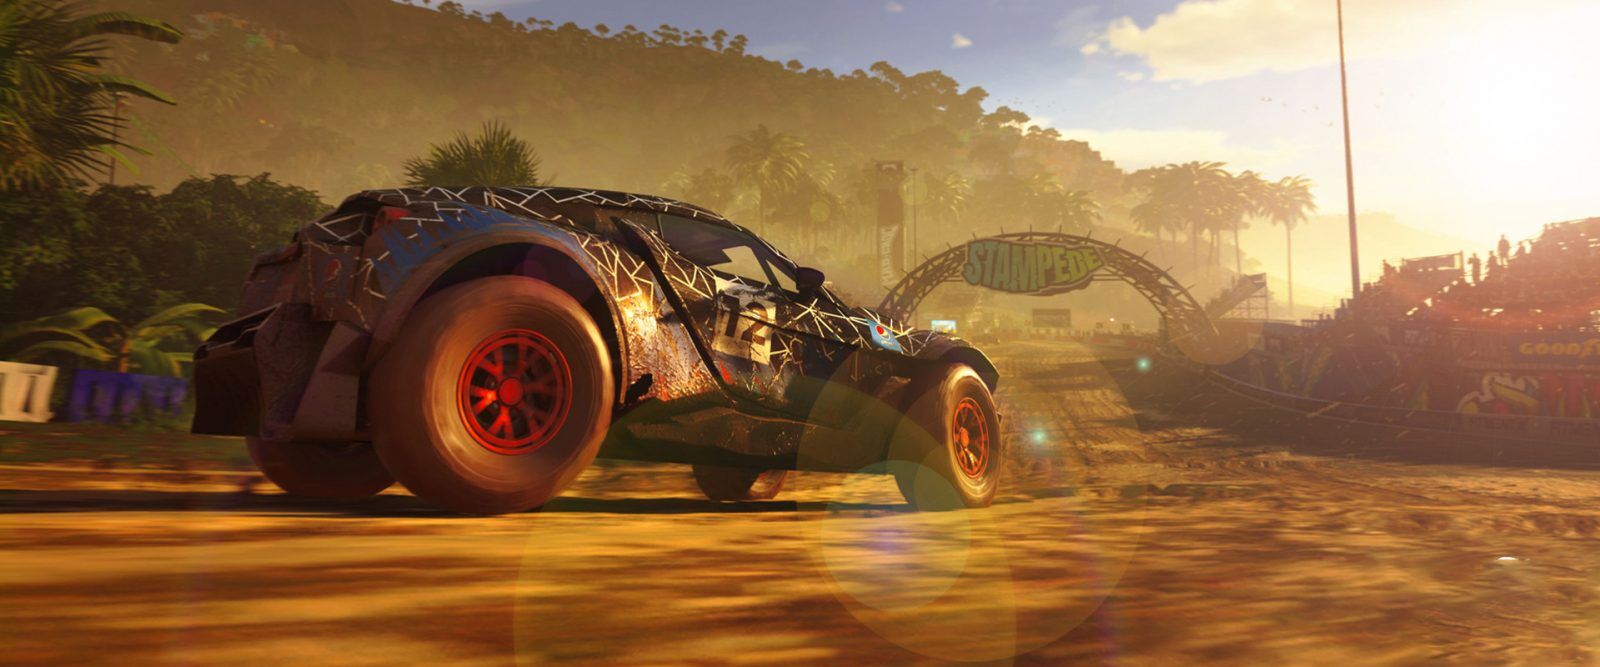 DIRT 5 map editor feature revealed at Opening Night Live